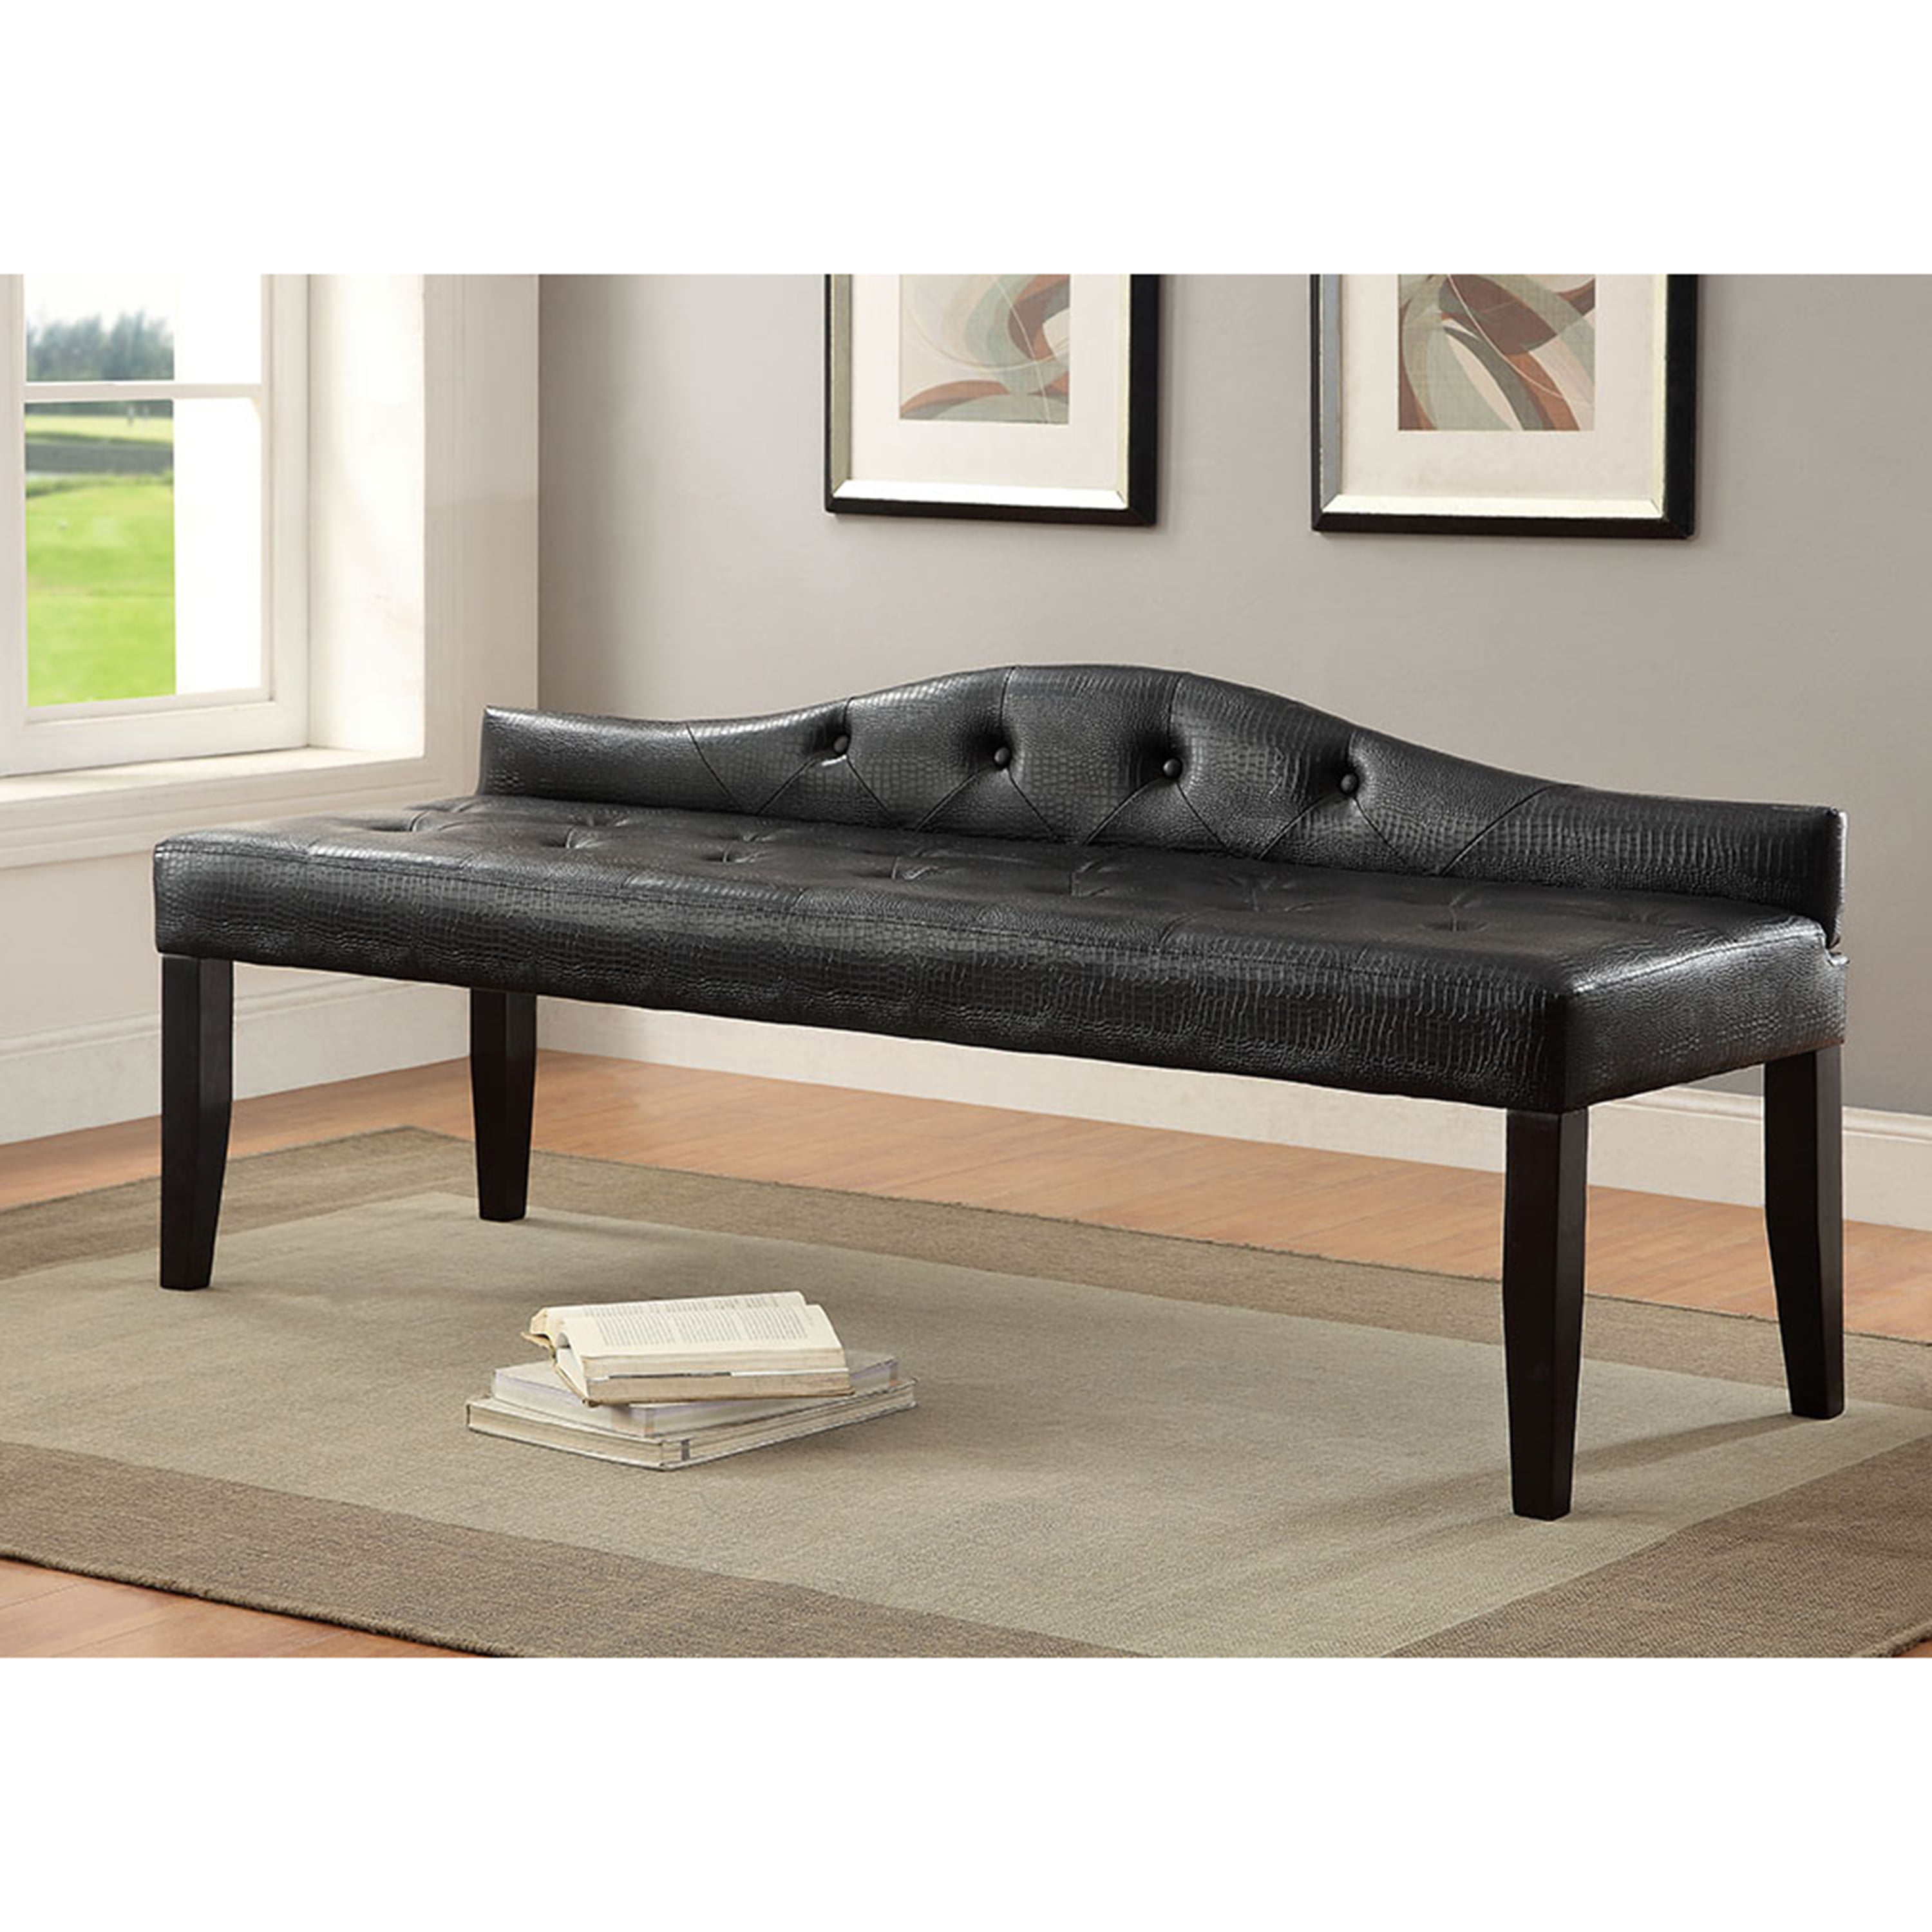 Buying Guide For The Best Bedroom Upholstered Bench